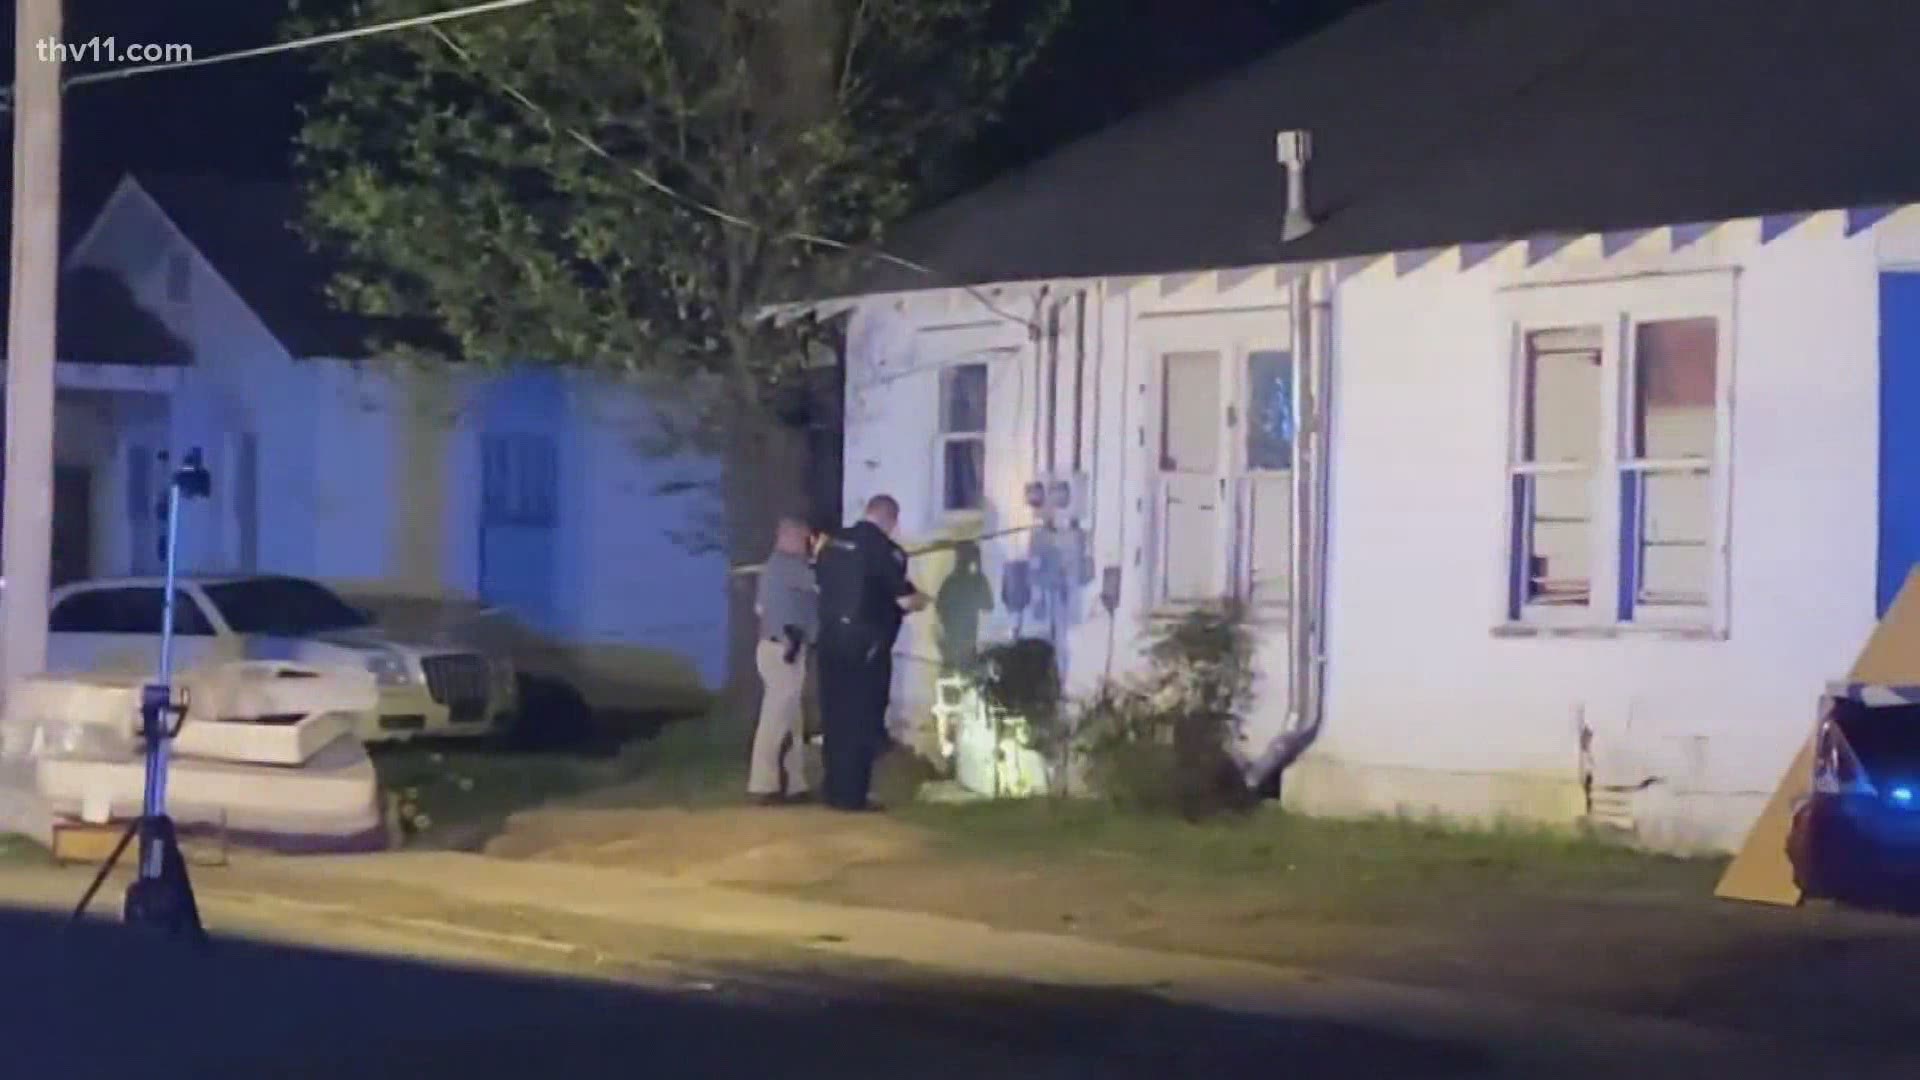 Police in North Little Rock are investigating a shooting that left at least two injured.